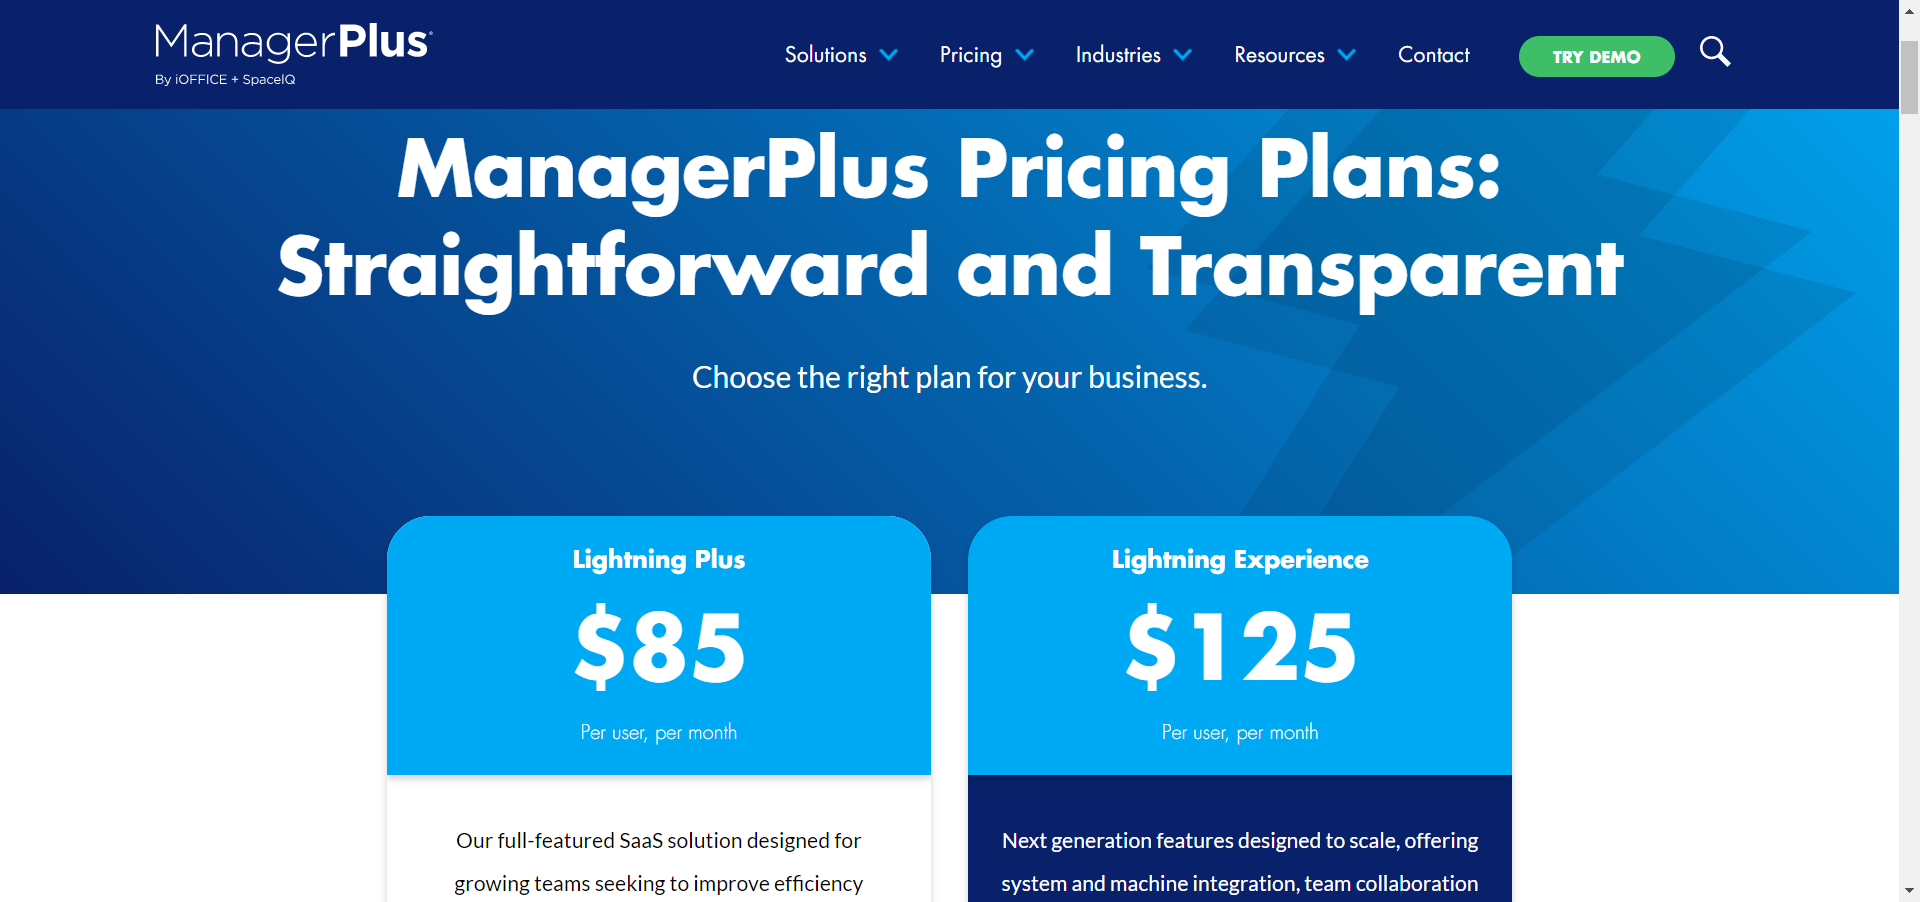 ManagerPlus pricing